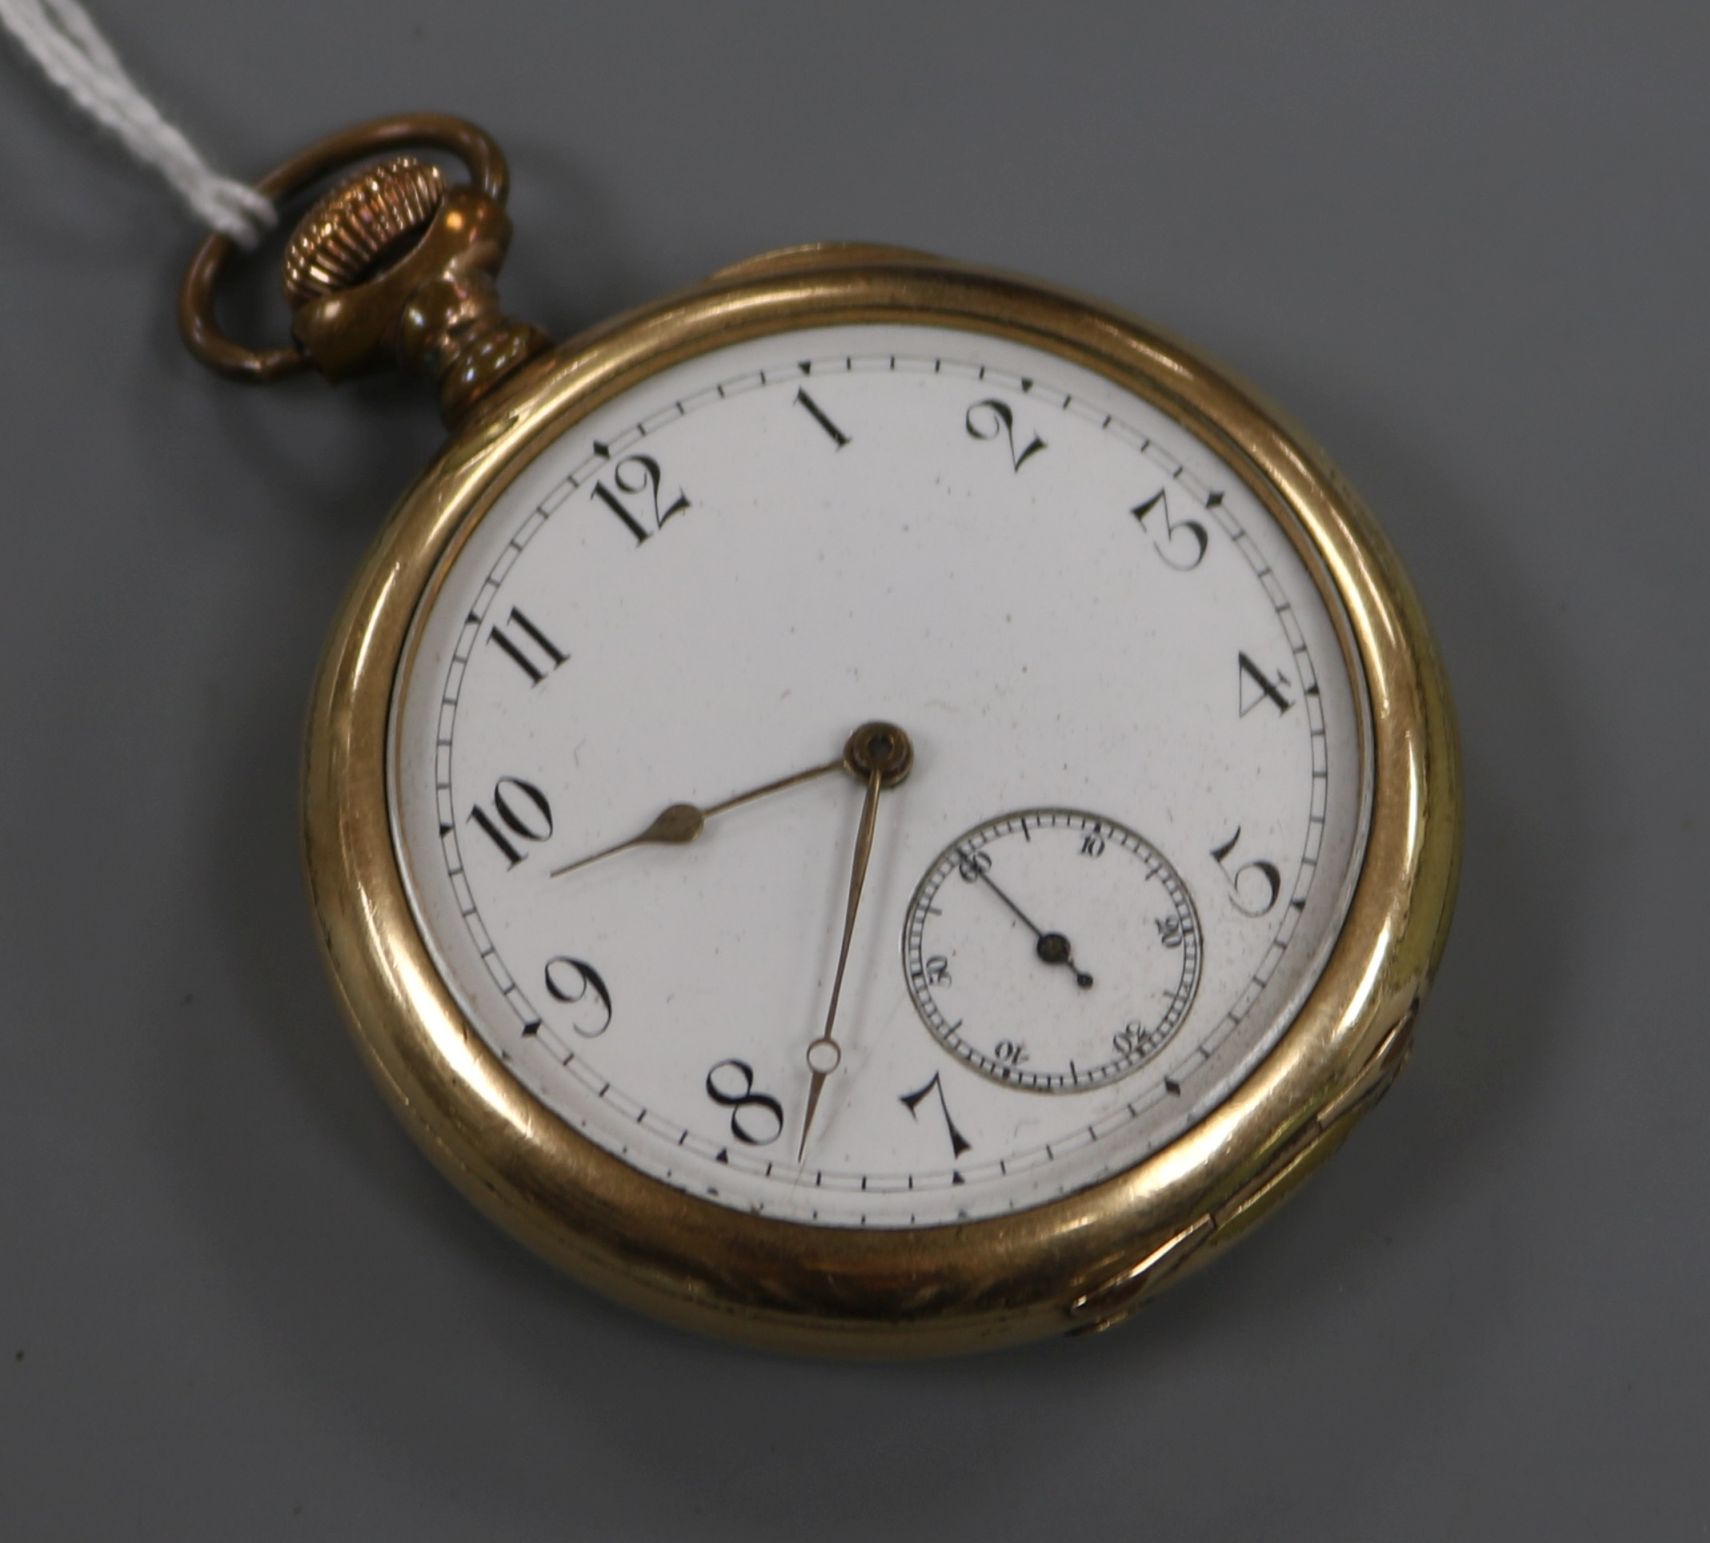 An American Waltham gold plated open face keyless pocket watch.